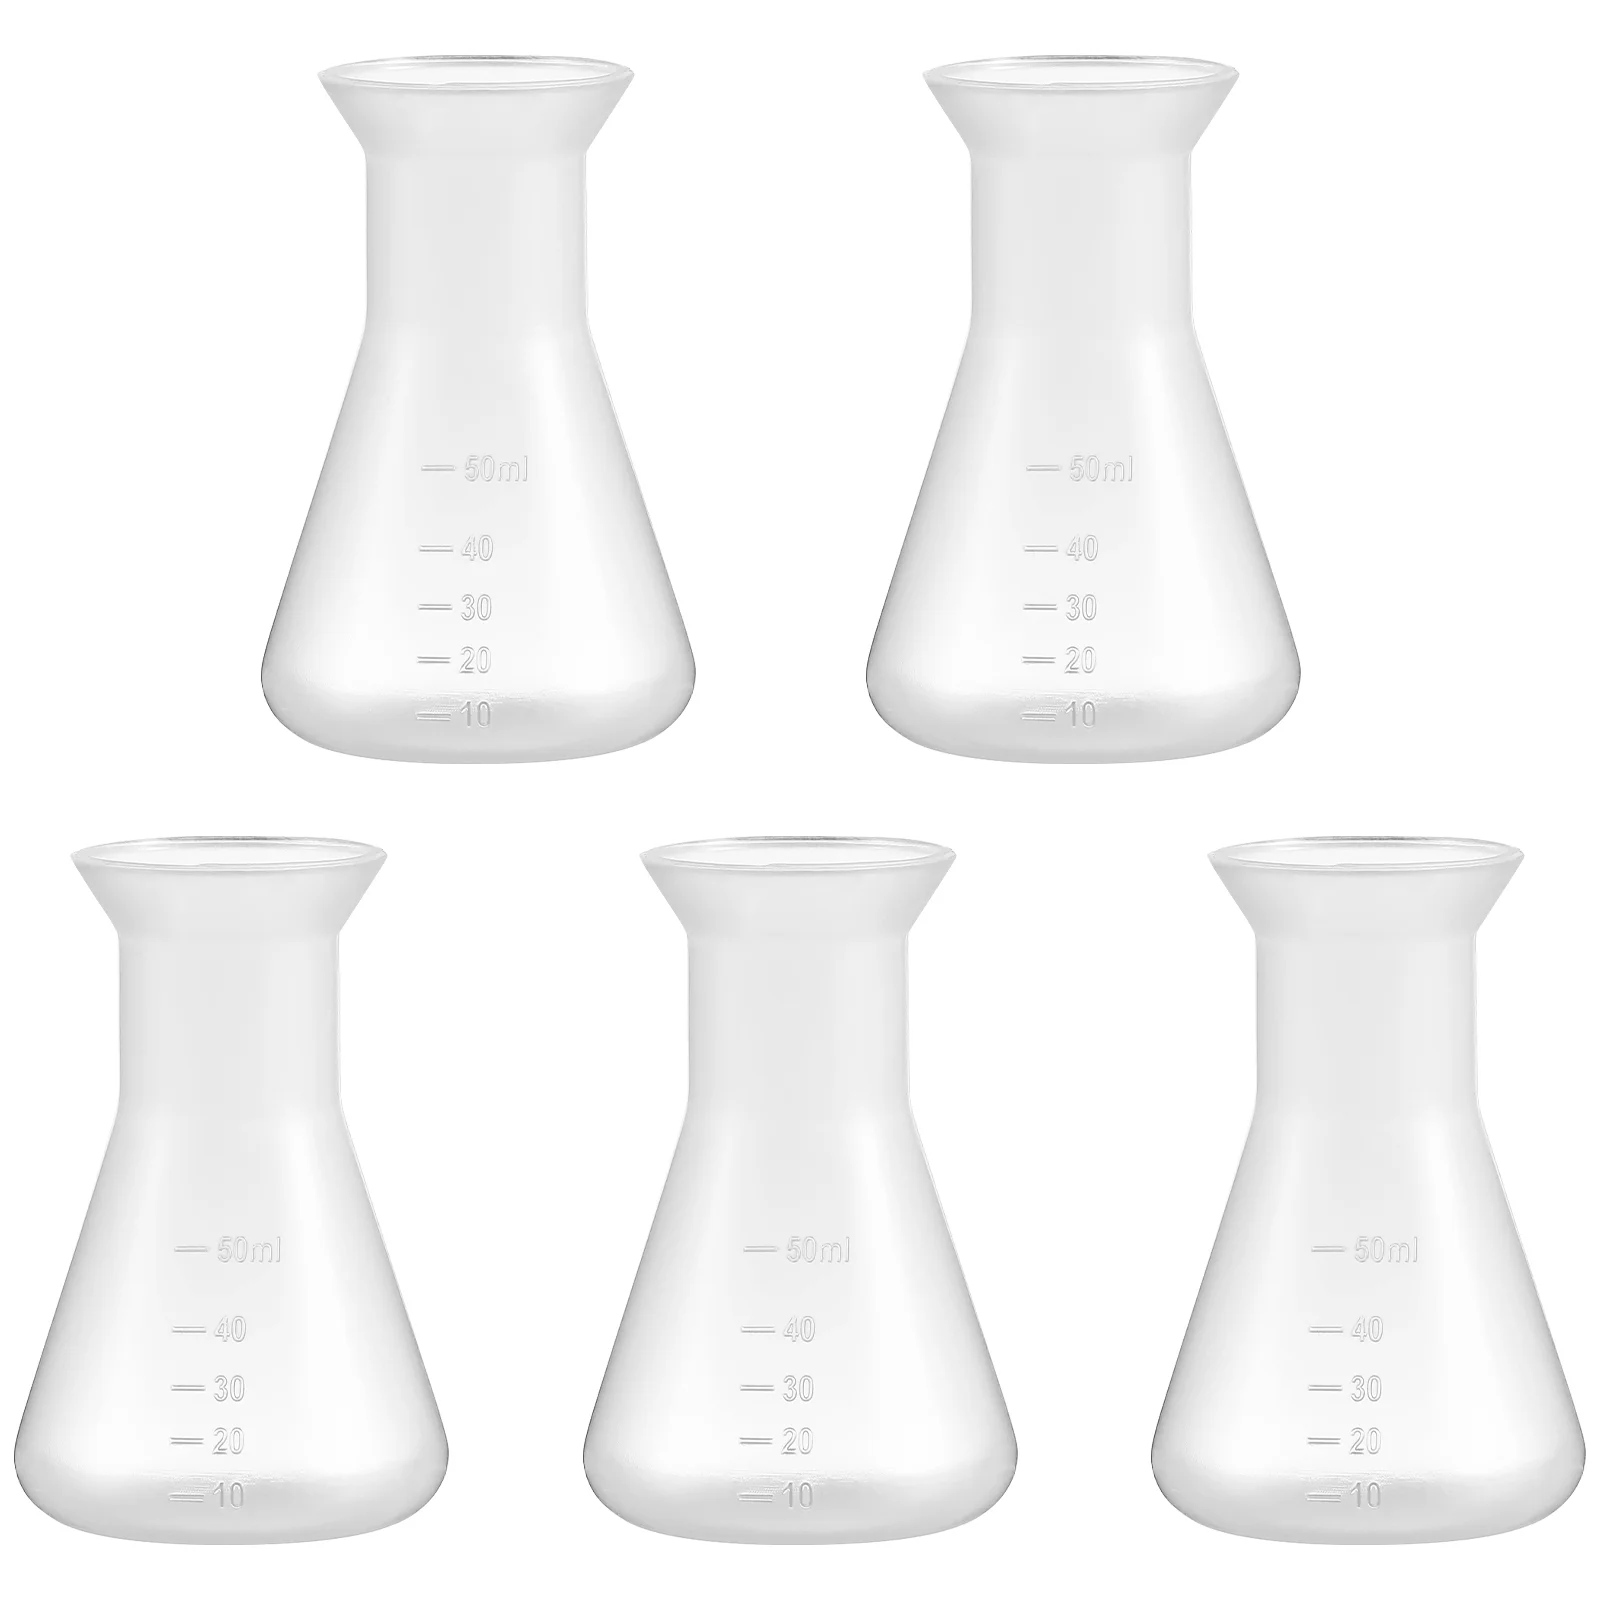 

5 Pcs Erlenmeyer Flasks Conical Flasks Scientific Measuring Bottles Containers for Laboratory